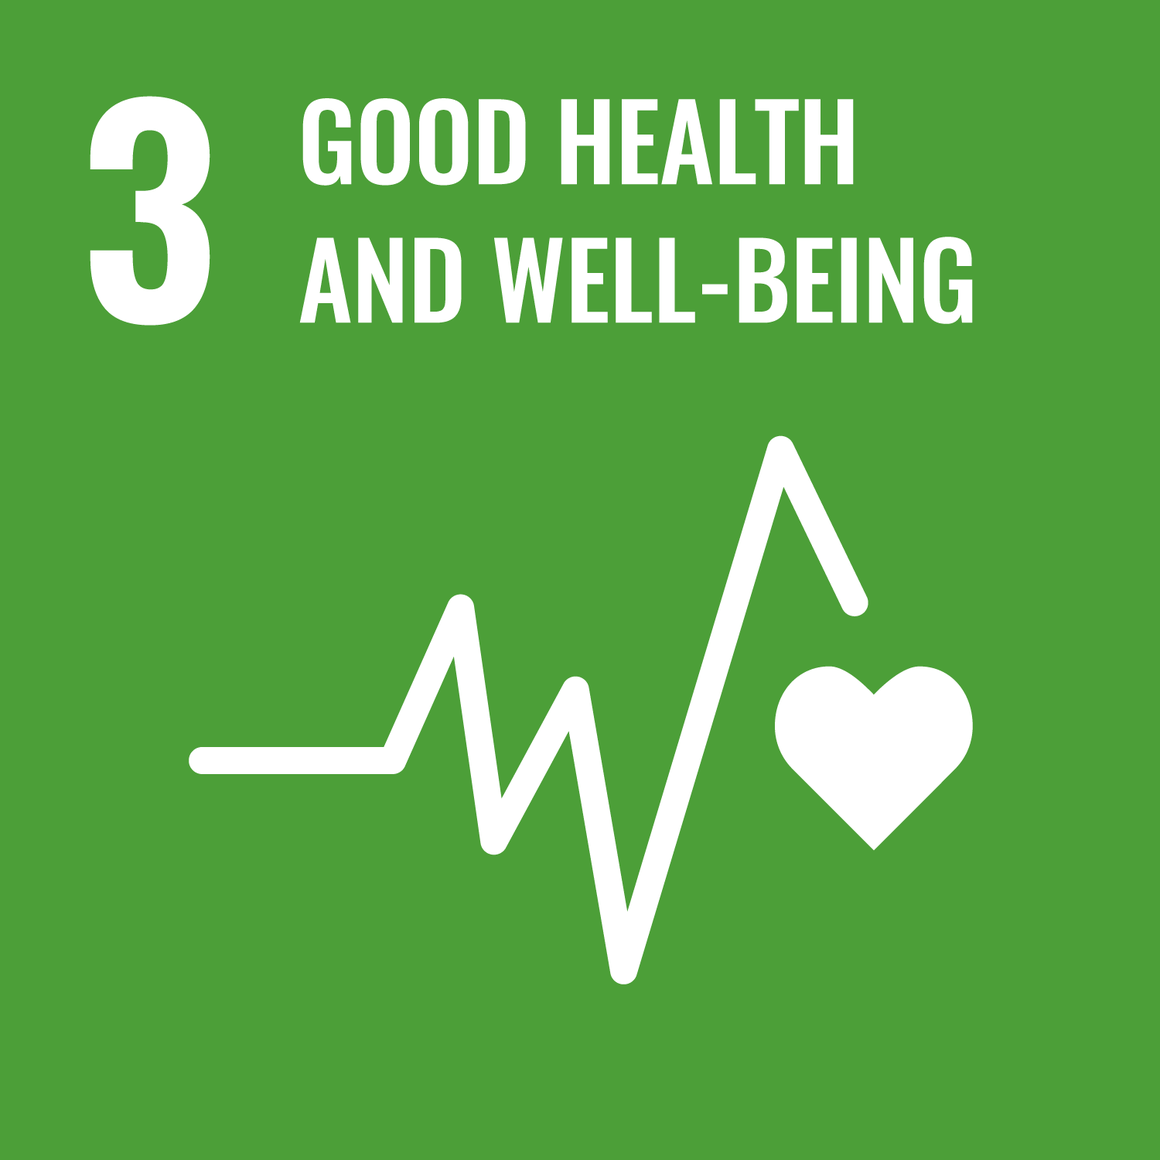 SDG good health and well being